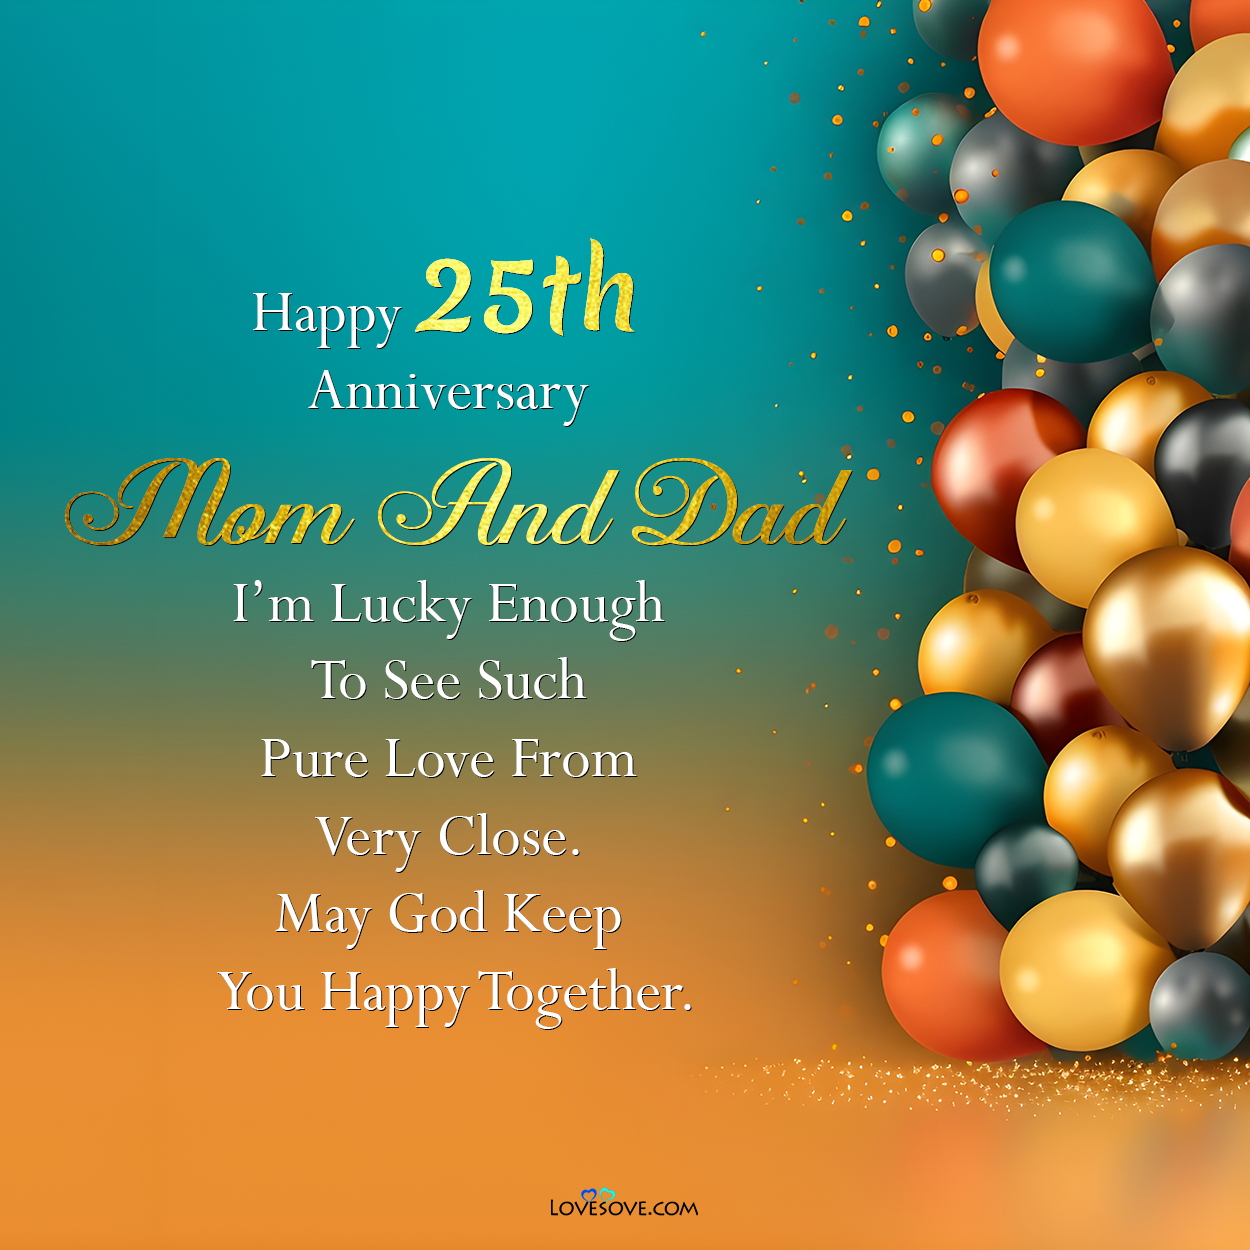 25th wedding anniversary wishes, 25th wedding anniversary wishes for parents